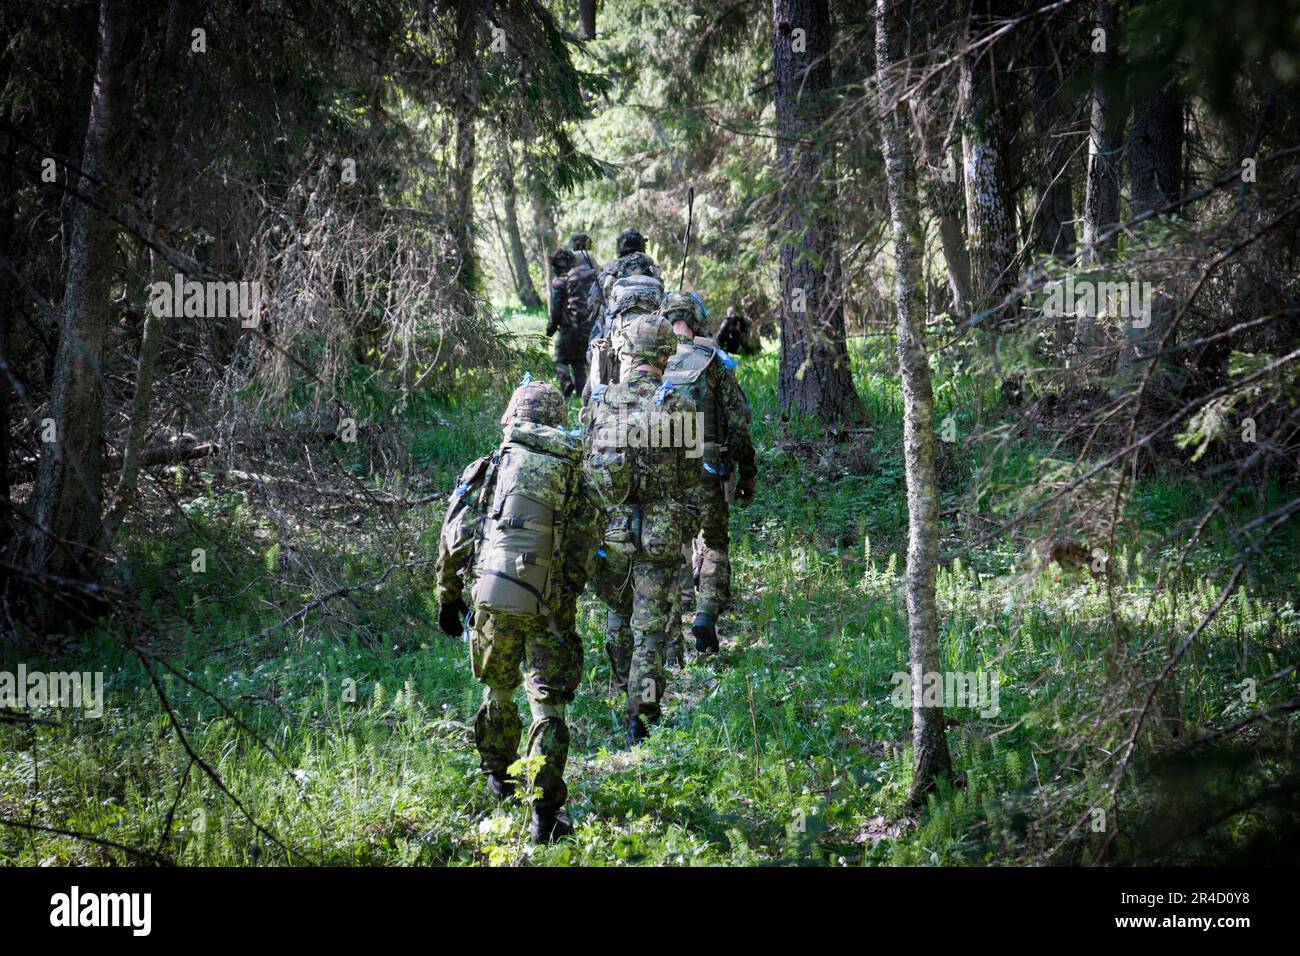 French and Estonian soldiers are seen in the woods during an exercise near Viitna, Estonia on 20 May, 2023. Estonia is hosting the Spring Storm NATO exercises involving over 13 thousand personnel with US, German, British, French and Polish forces training together with the Estonian Defence Forces (eDF). (Photo by Jaap Arriens / Sipa USA) Stock Photo